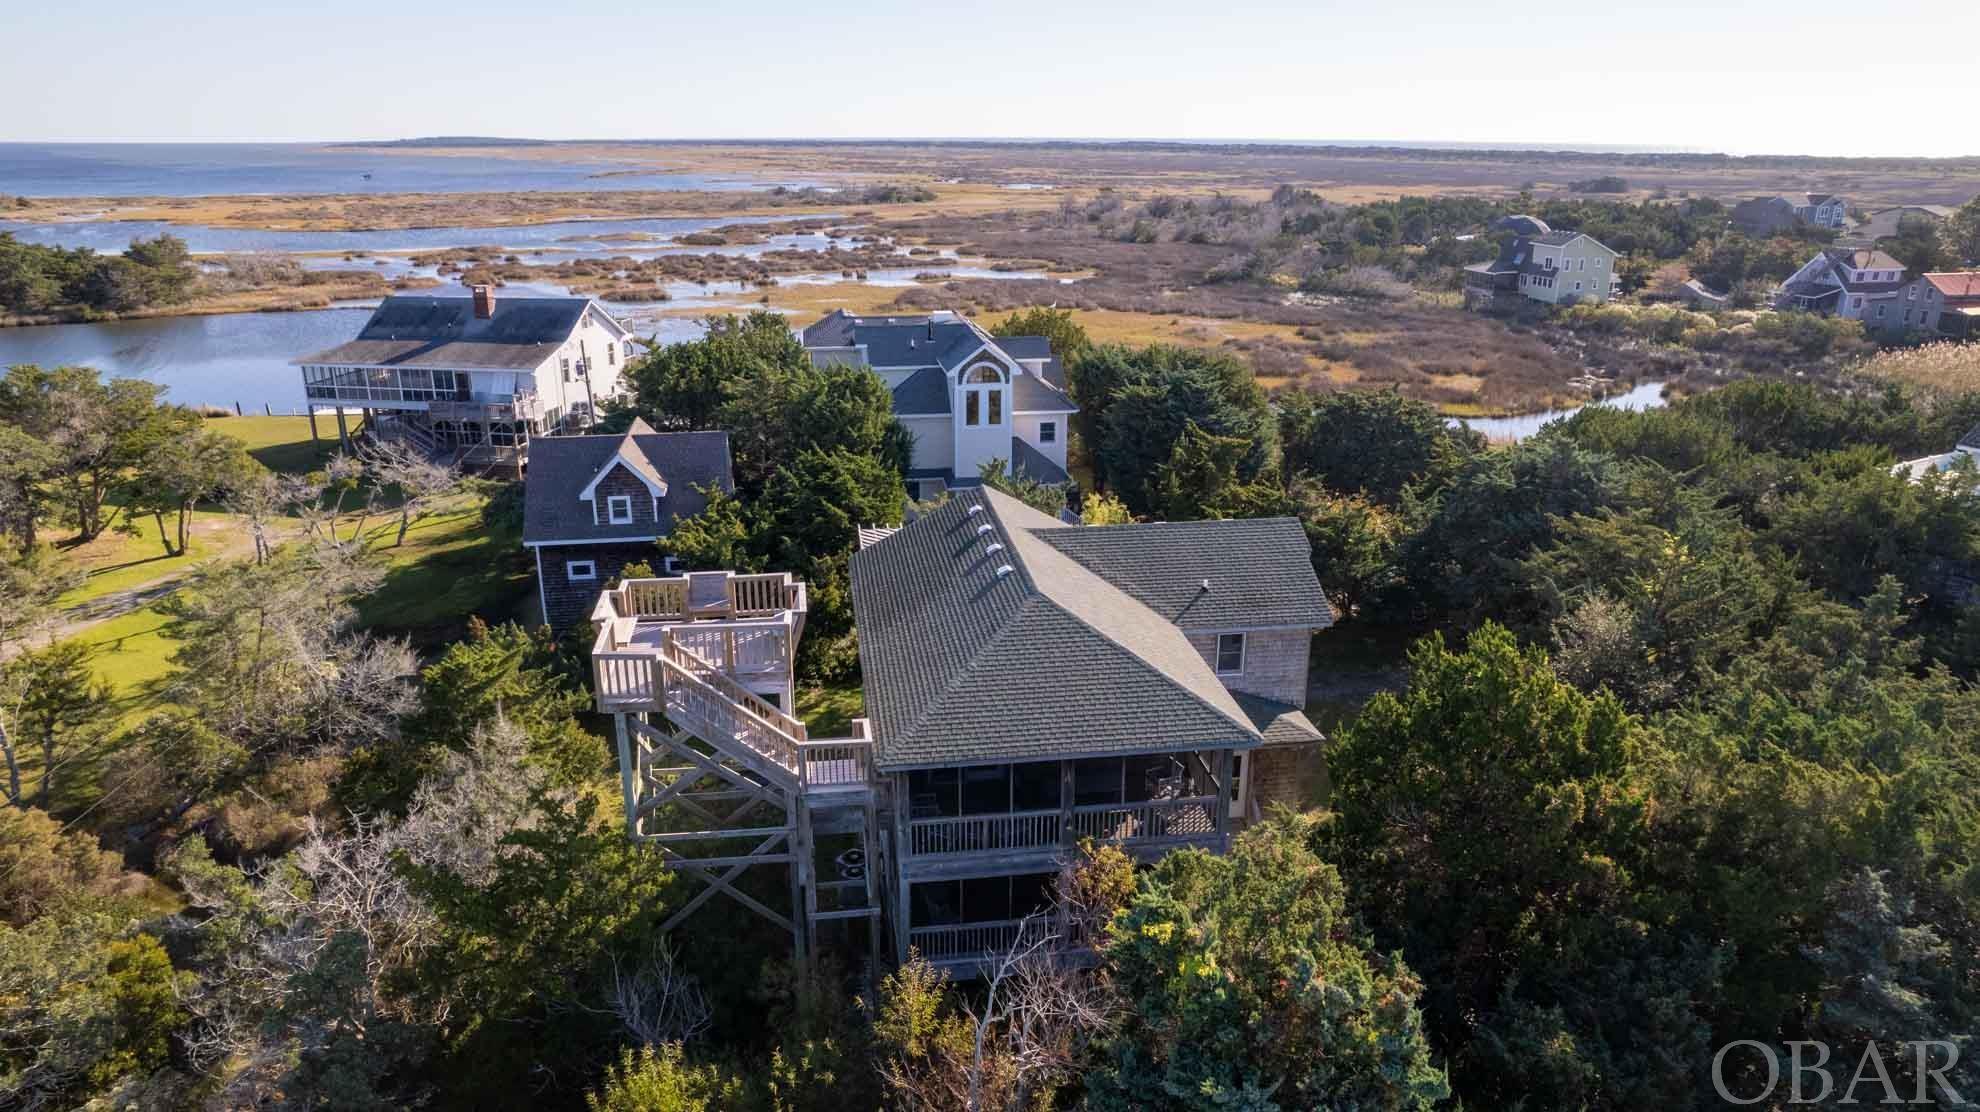 This beautiful custom built home is just one house down from the end of a dead-end road with a foot path to canal connecting to Pamlico Sound providing kayak, SUP or john boat access to all residents of Sarah Ellen. Artfully designed, the reverse floor plan offers privacy and excellent natural lighting.  Multi level decks and screened porches capitalize on the tranquil setting.  A roof top deck with built in seating offers panoramic views from sound to ocean.  The first floor has 2 bedrooms and a full bath, washer dryer, an office/study/bonus room and a large room with its own exterior door access which could be used as an additional bedroom (septic system can accommodate up to 4 bedrooms).  The second floor has an open floor plan and cathedral ceilings with a spacious kitchen open to a dining and living area and a 1/2 bath.  Also on this floor is master bedroom with its own en suite custom tiled bath.  A large, full house length 2 level screened porch runs along the back of the house, two level open decks adorn the front.  On the north side the large roof top deck boasts spectacular views and sunsets.  This home is currently seller's primary residence but could easily become a spectacular vacation rental providing supplemental income.